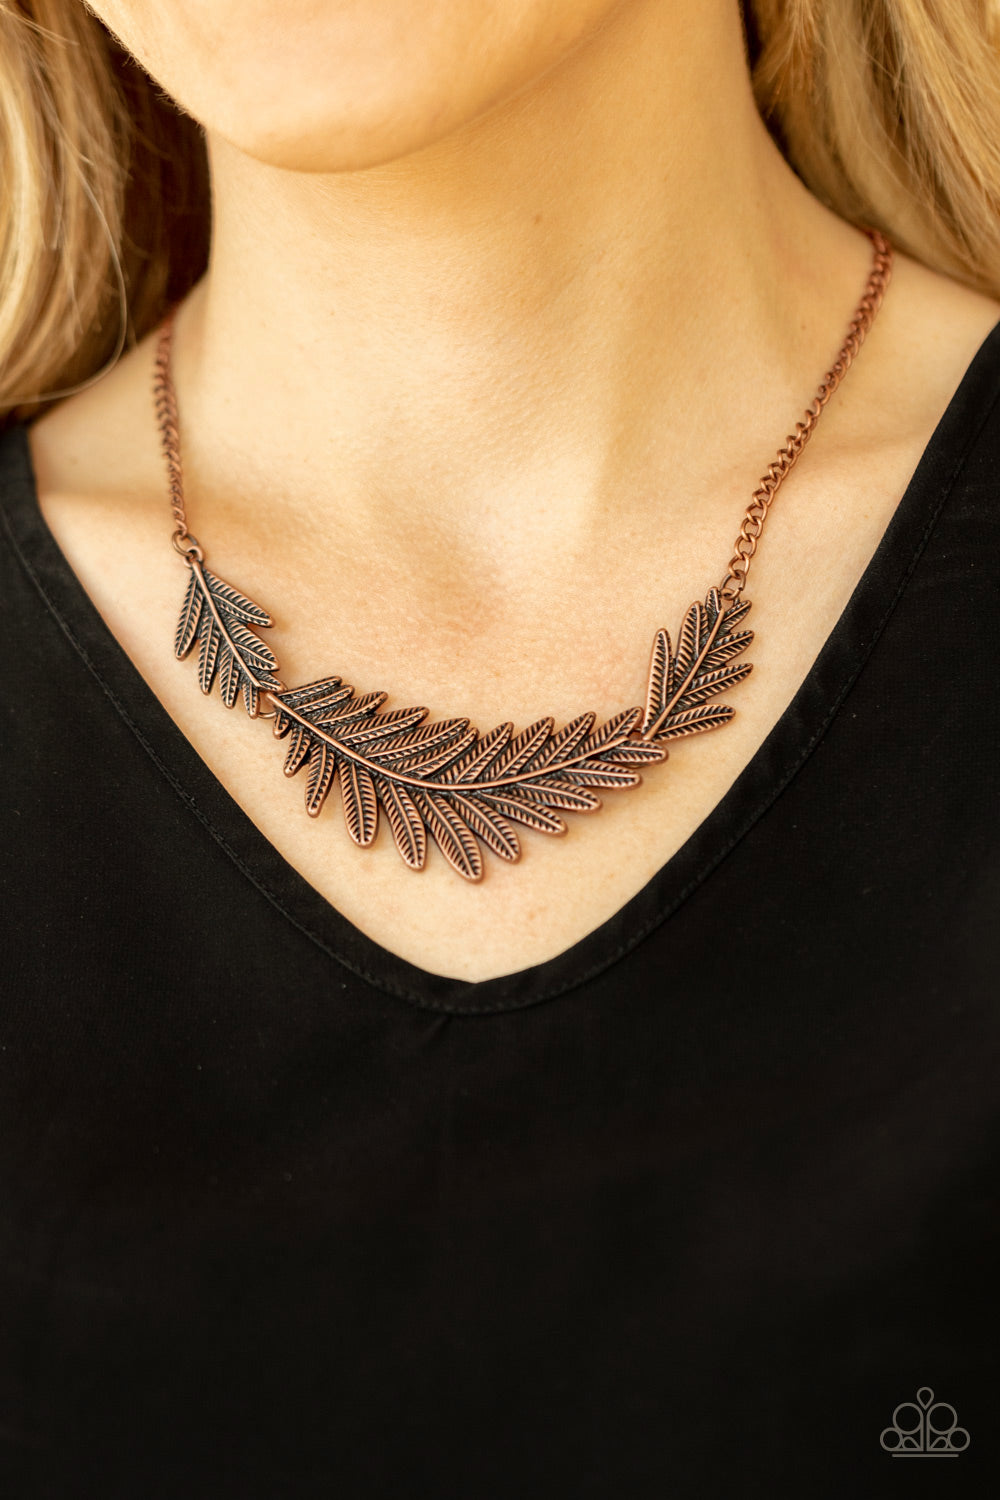 Queen of the QUILL Copper Necklace - Paparazzi Accessories  Etched and embossed in lifelike textures, leafy copper plates connect into a dramatic feather below the collar for a seasonal statement. Features an adjustable clasp closure.  All Paparazzi Accessories are lead free and nickel free!  Sold as one individual necklace. Includes one pair of matching earrings.